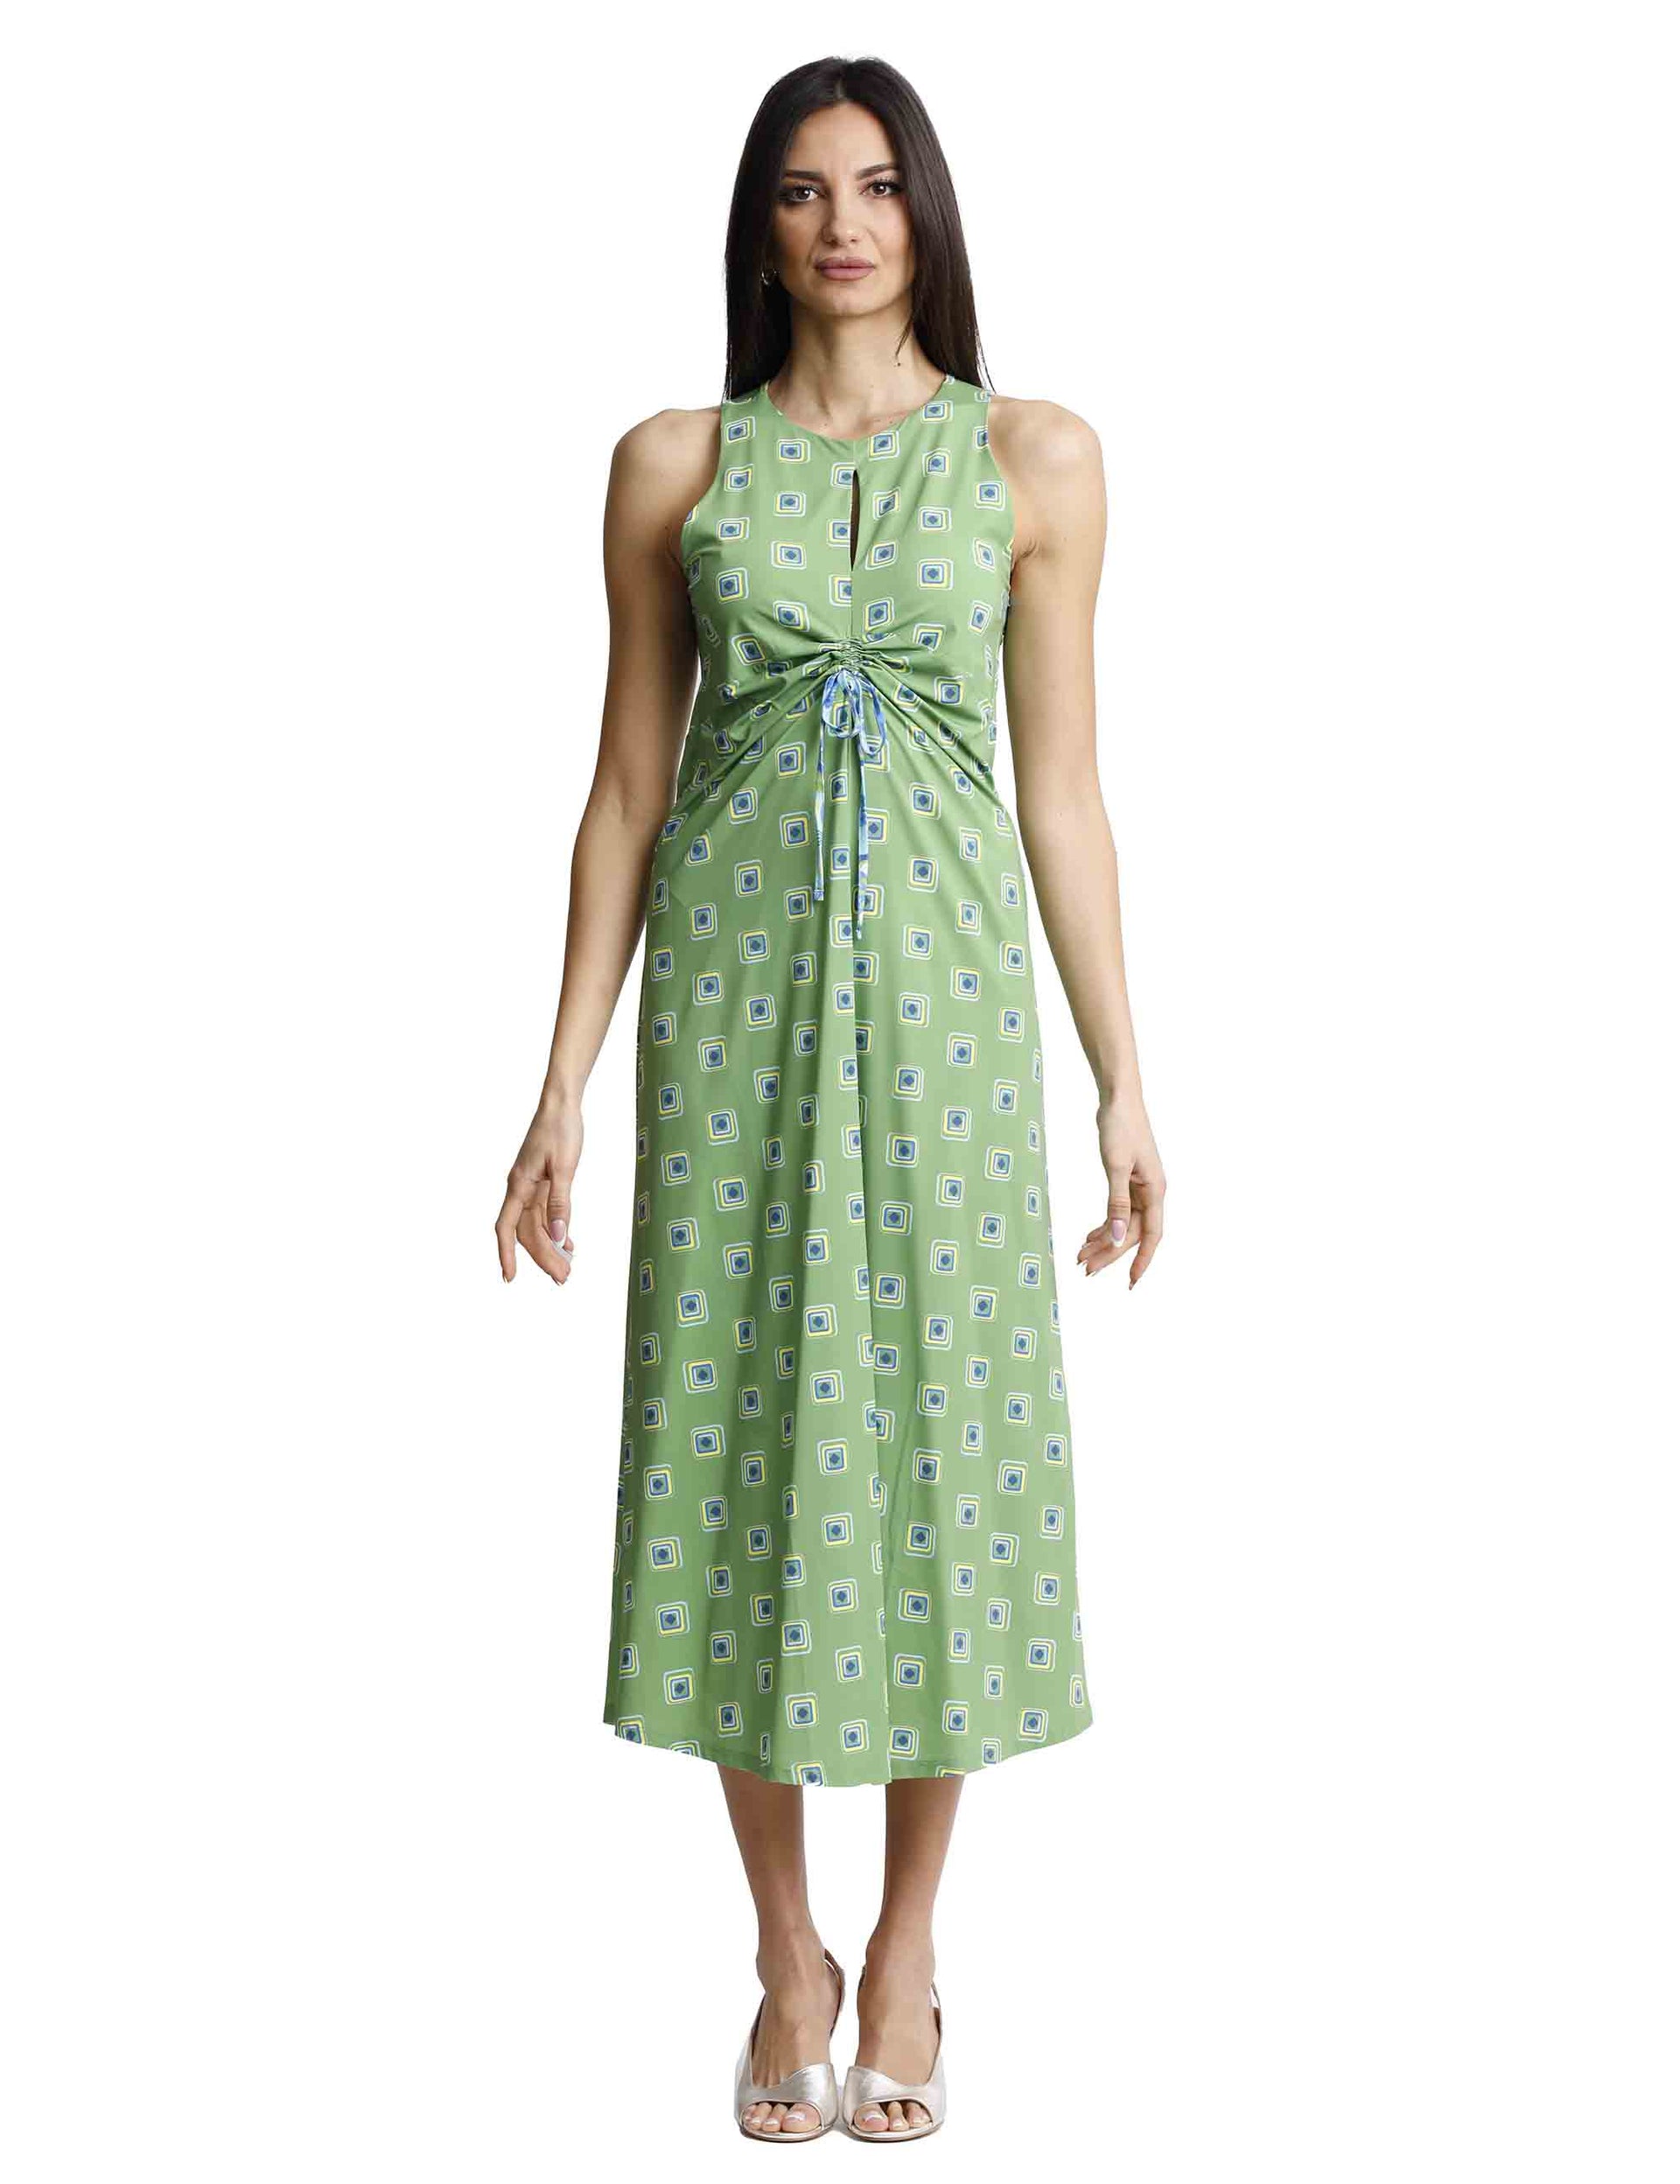 Marigold women's long dresses in green and blue jersey with draping